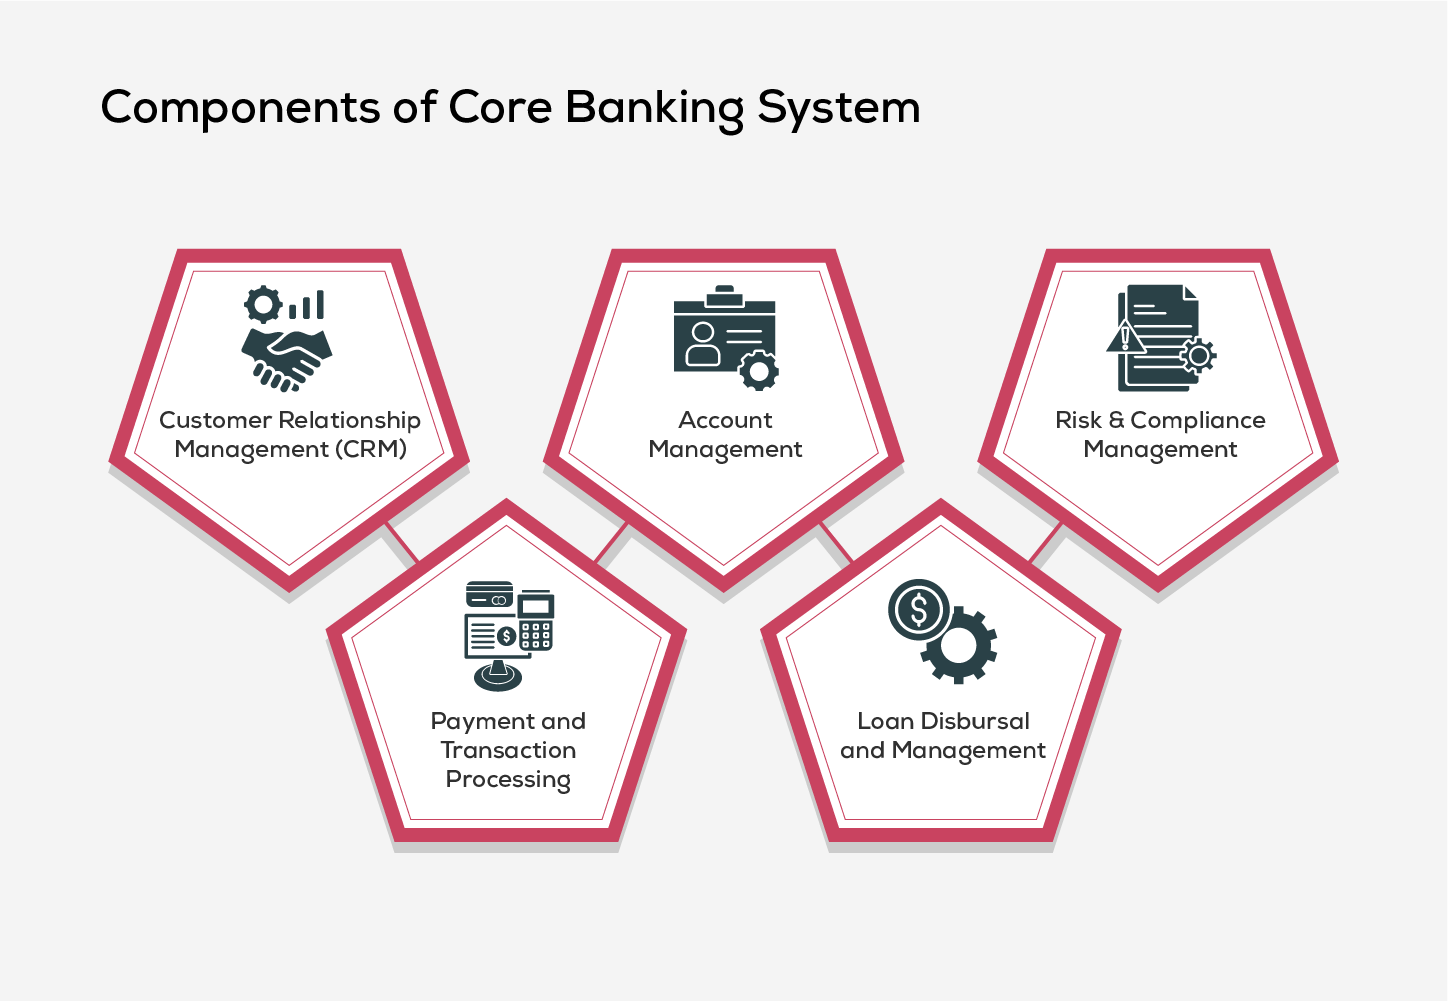 Components of Core Banking System